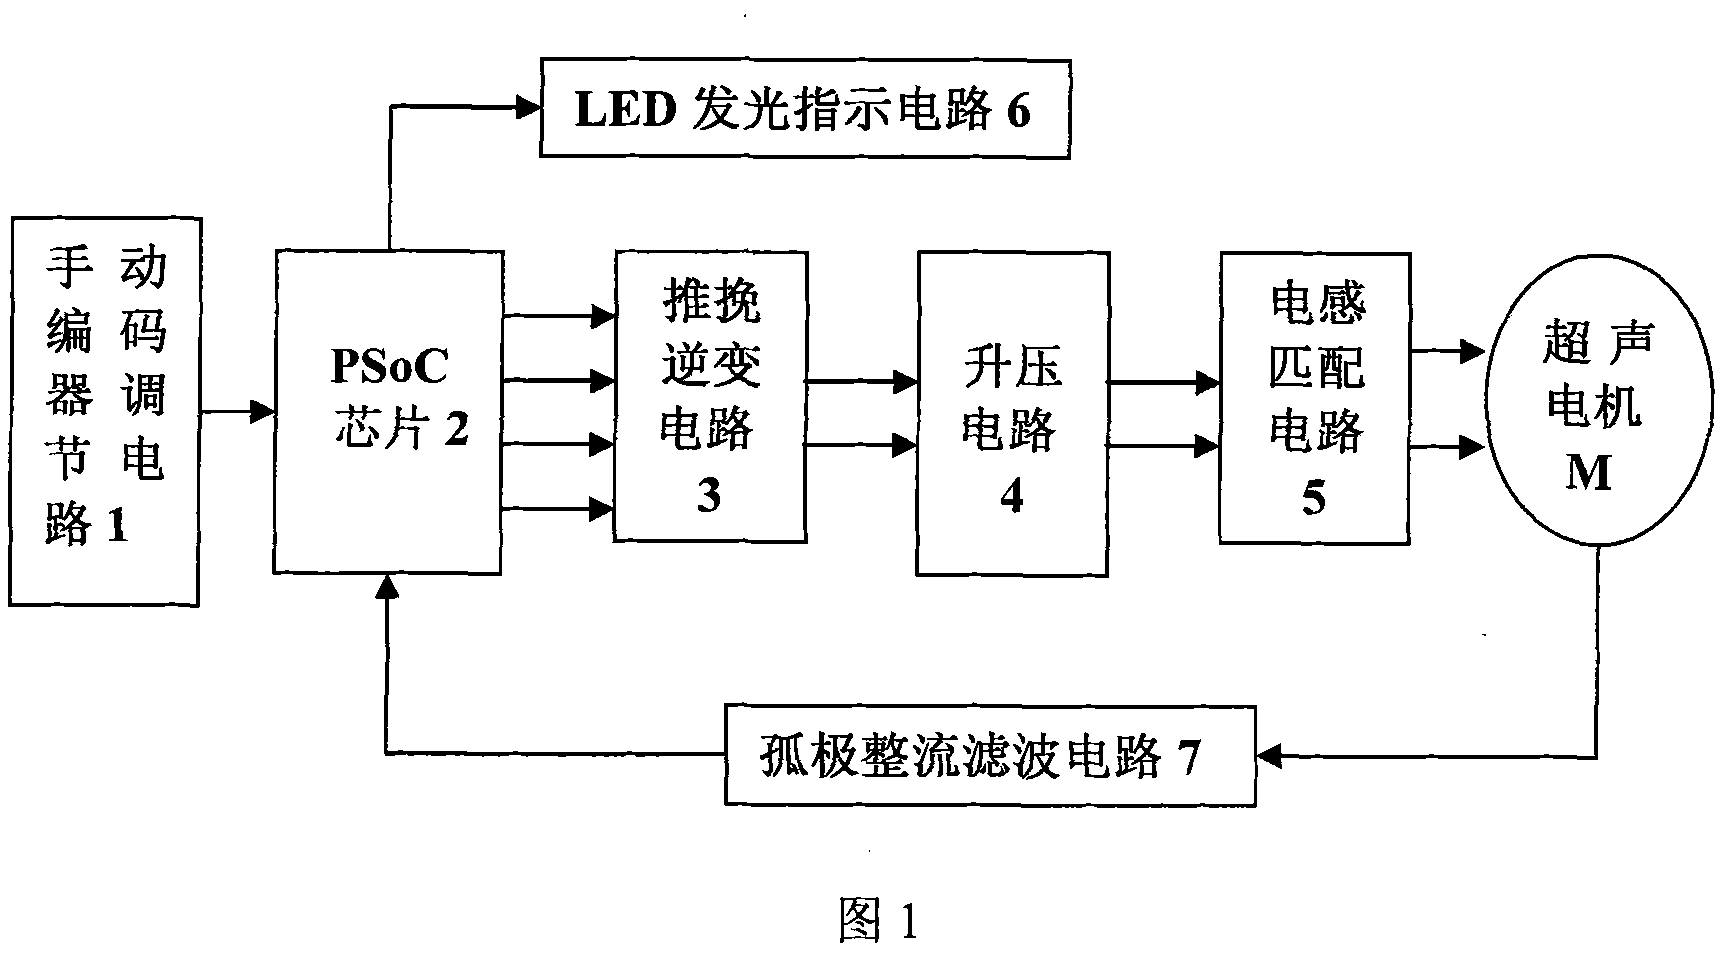 Ultrasound motor drive controller based on built-in system chip